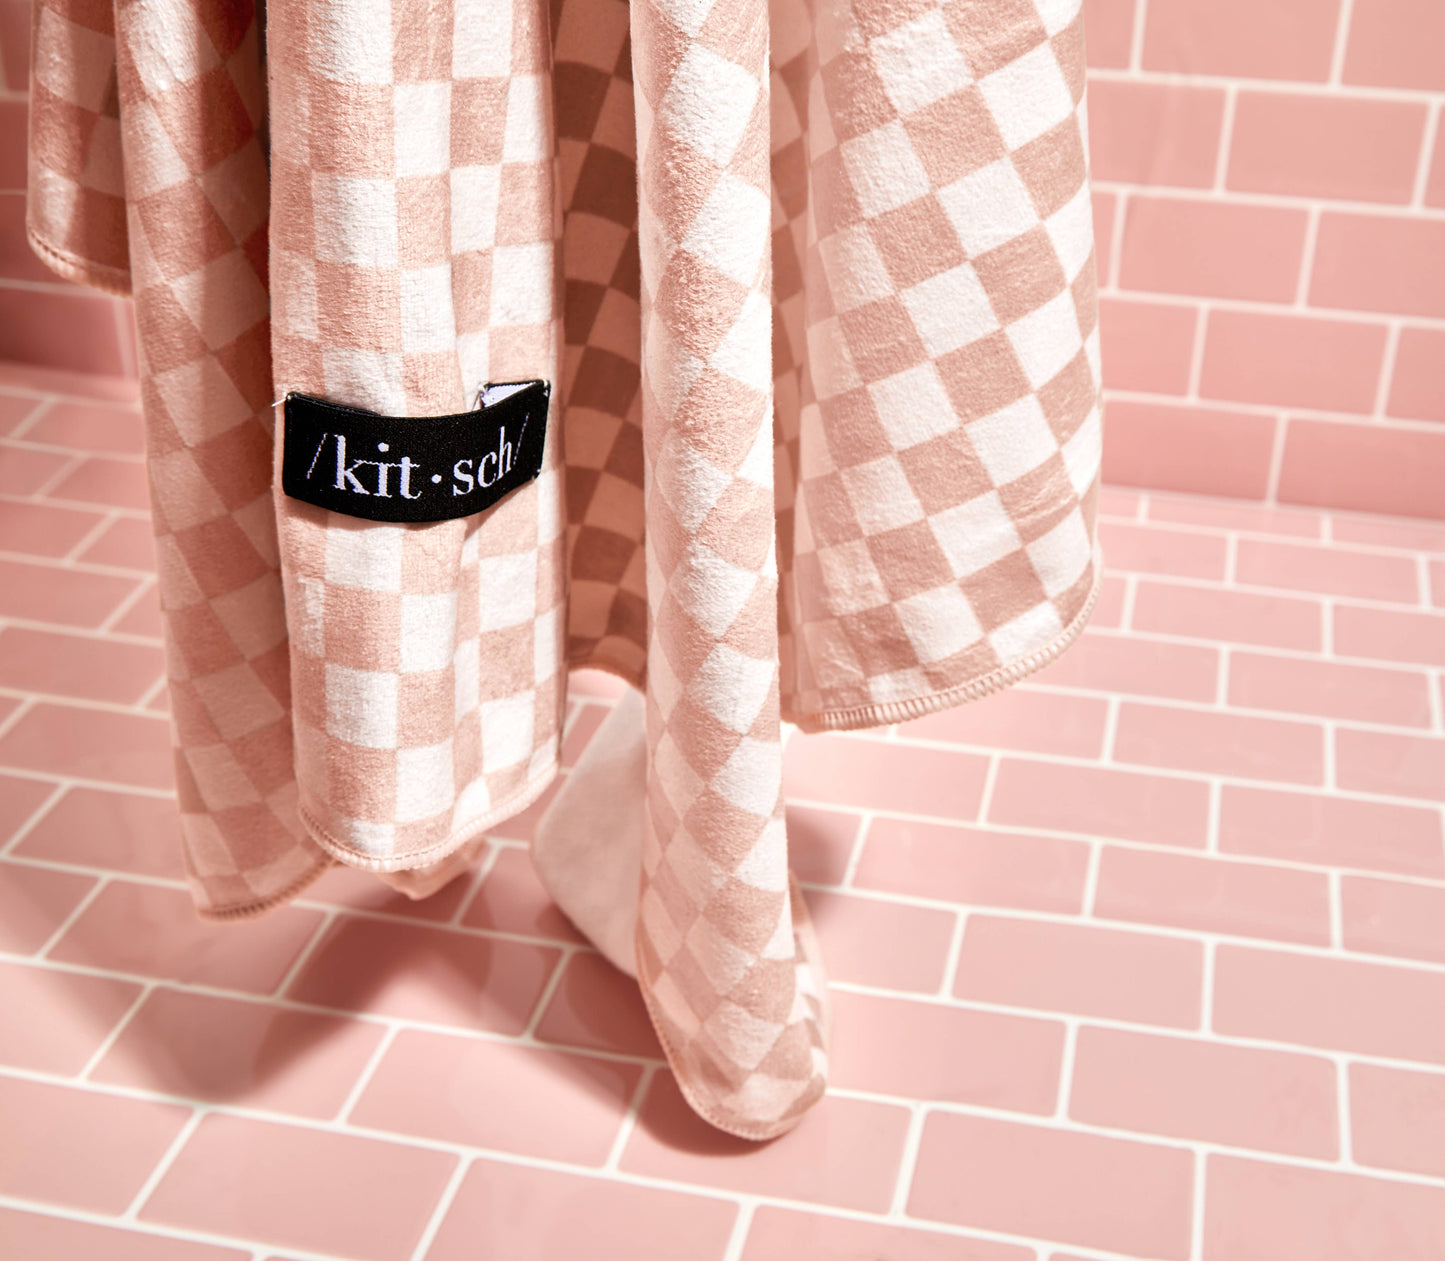 Extra Large Hair Towel Wrap - Terracotta Checker